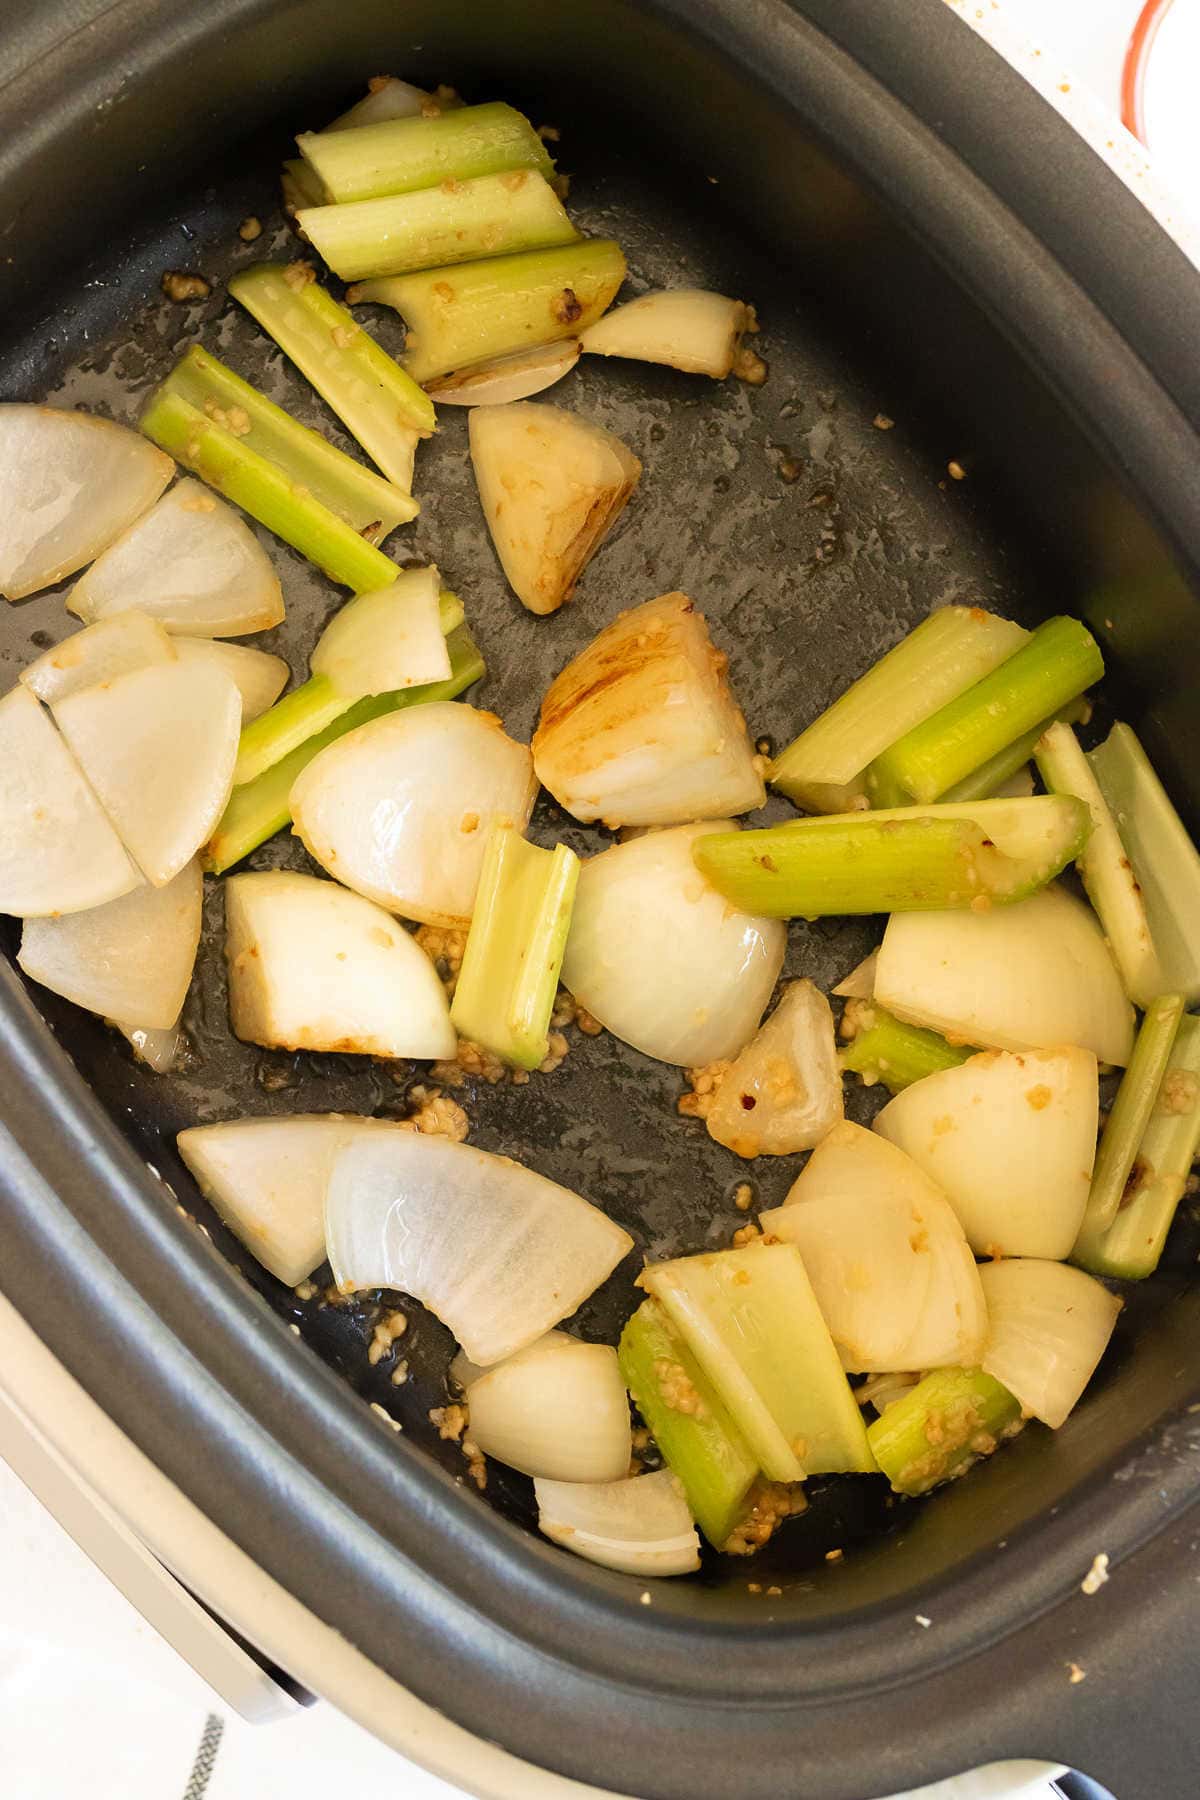 Sauteed onions and celery in the multi-cooker